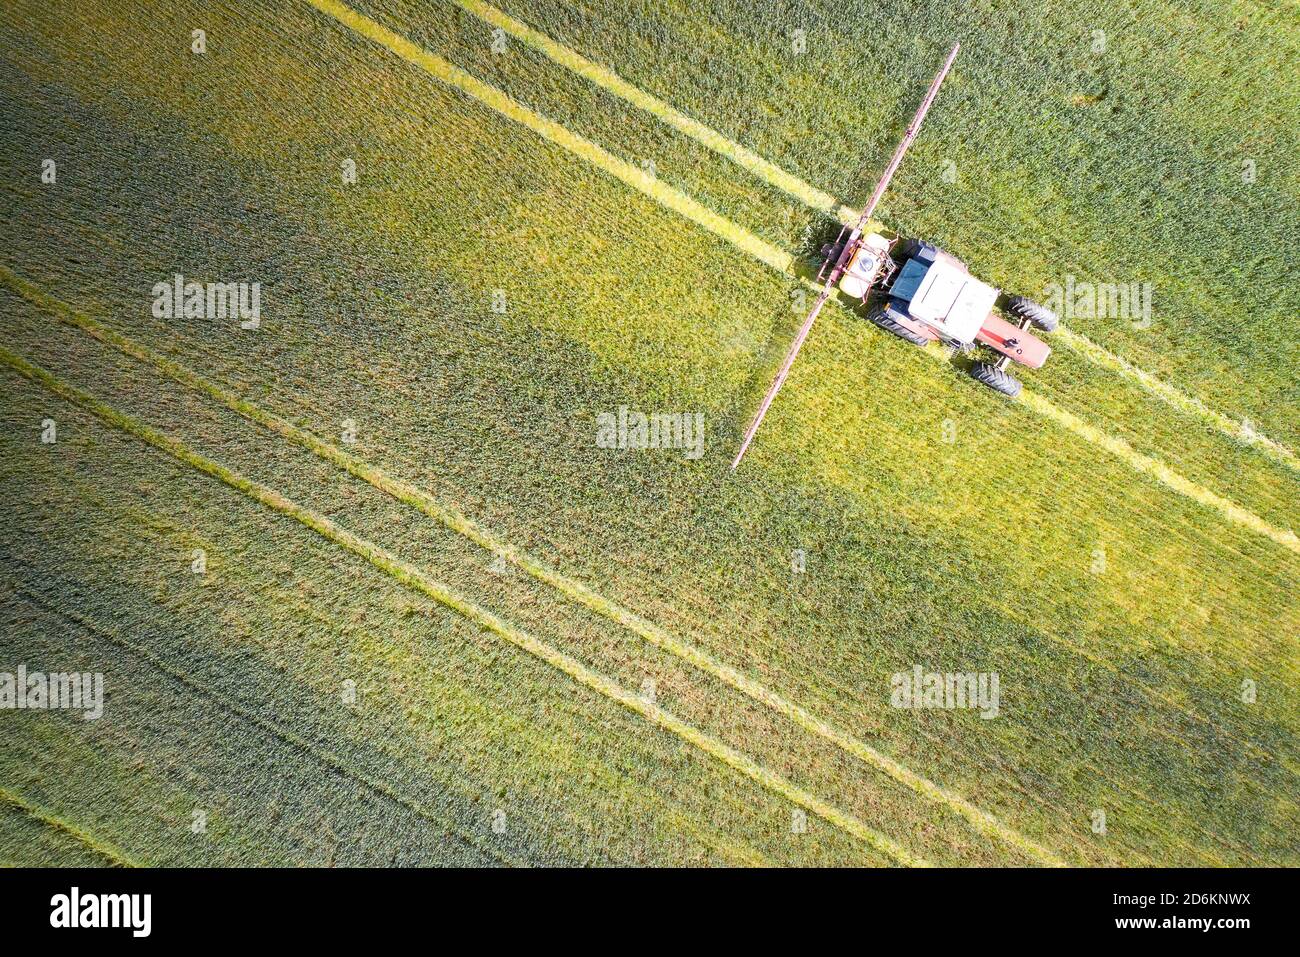 Drone point of view of a Tractor spraying on a cultivated field. Stock Photo